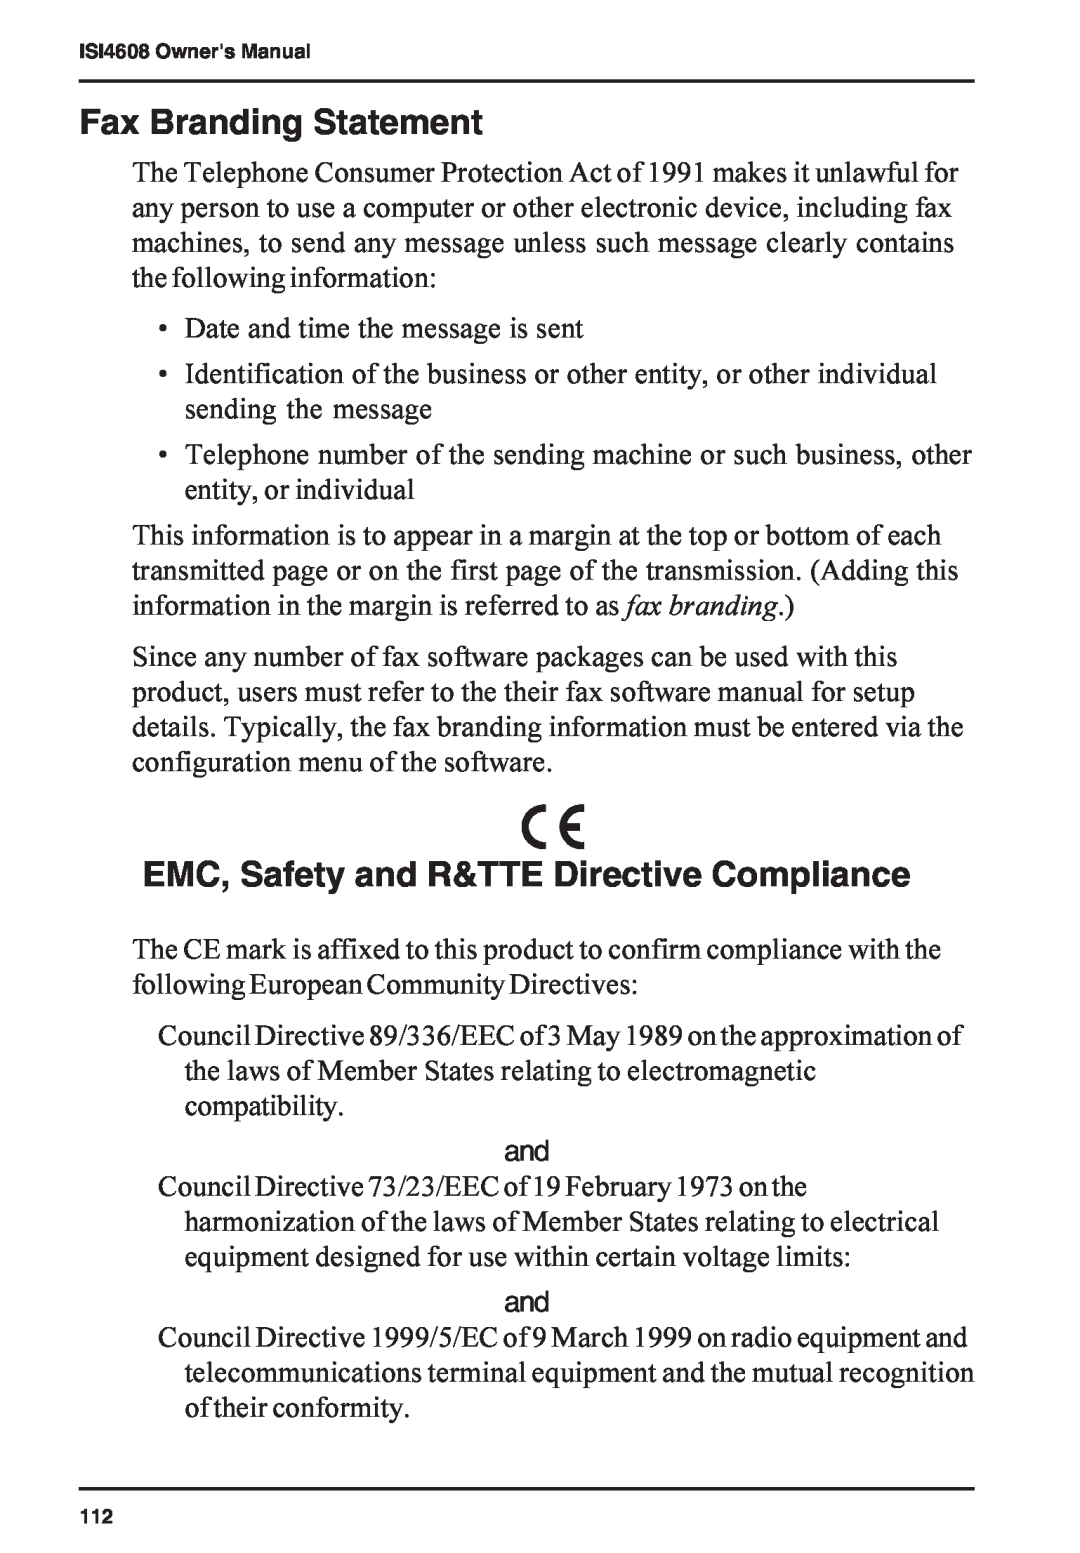 Multi-Tech Systems ISI5634PCI/4/8 manual Fax Branding Statement, EMC, Safety and R&TTE Directive Compliance 